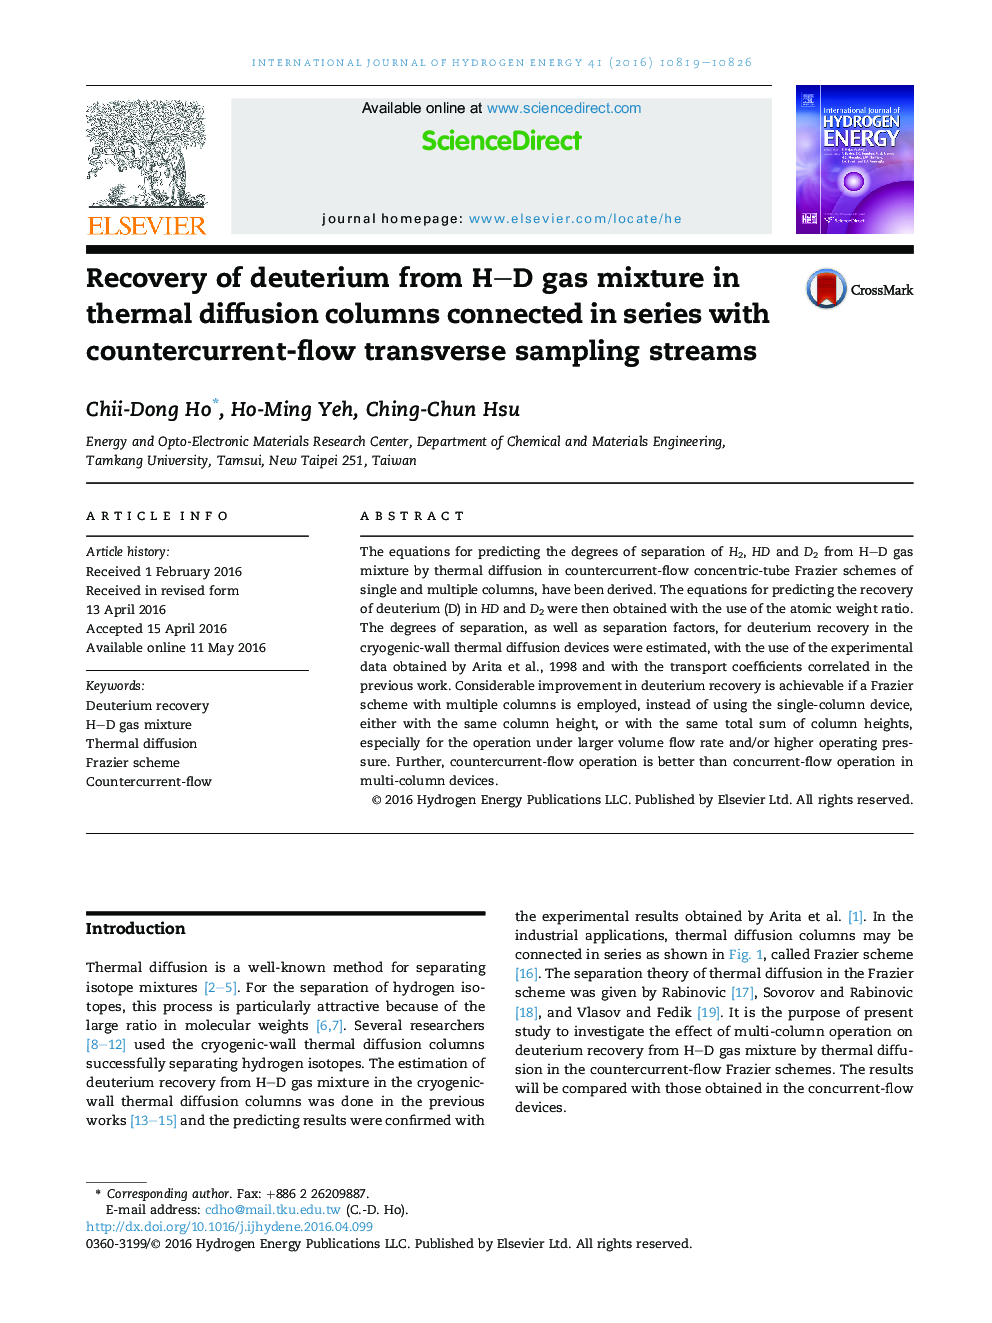 Recovery of deuterium from H–D gas mixture in thermal diffusion columns connected in series with countercurrent-flow transverse sampling streams